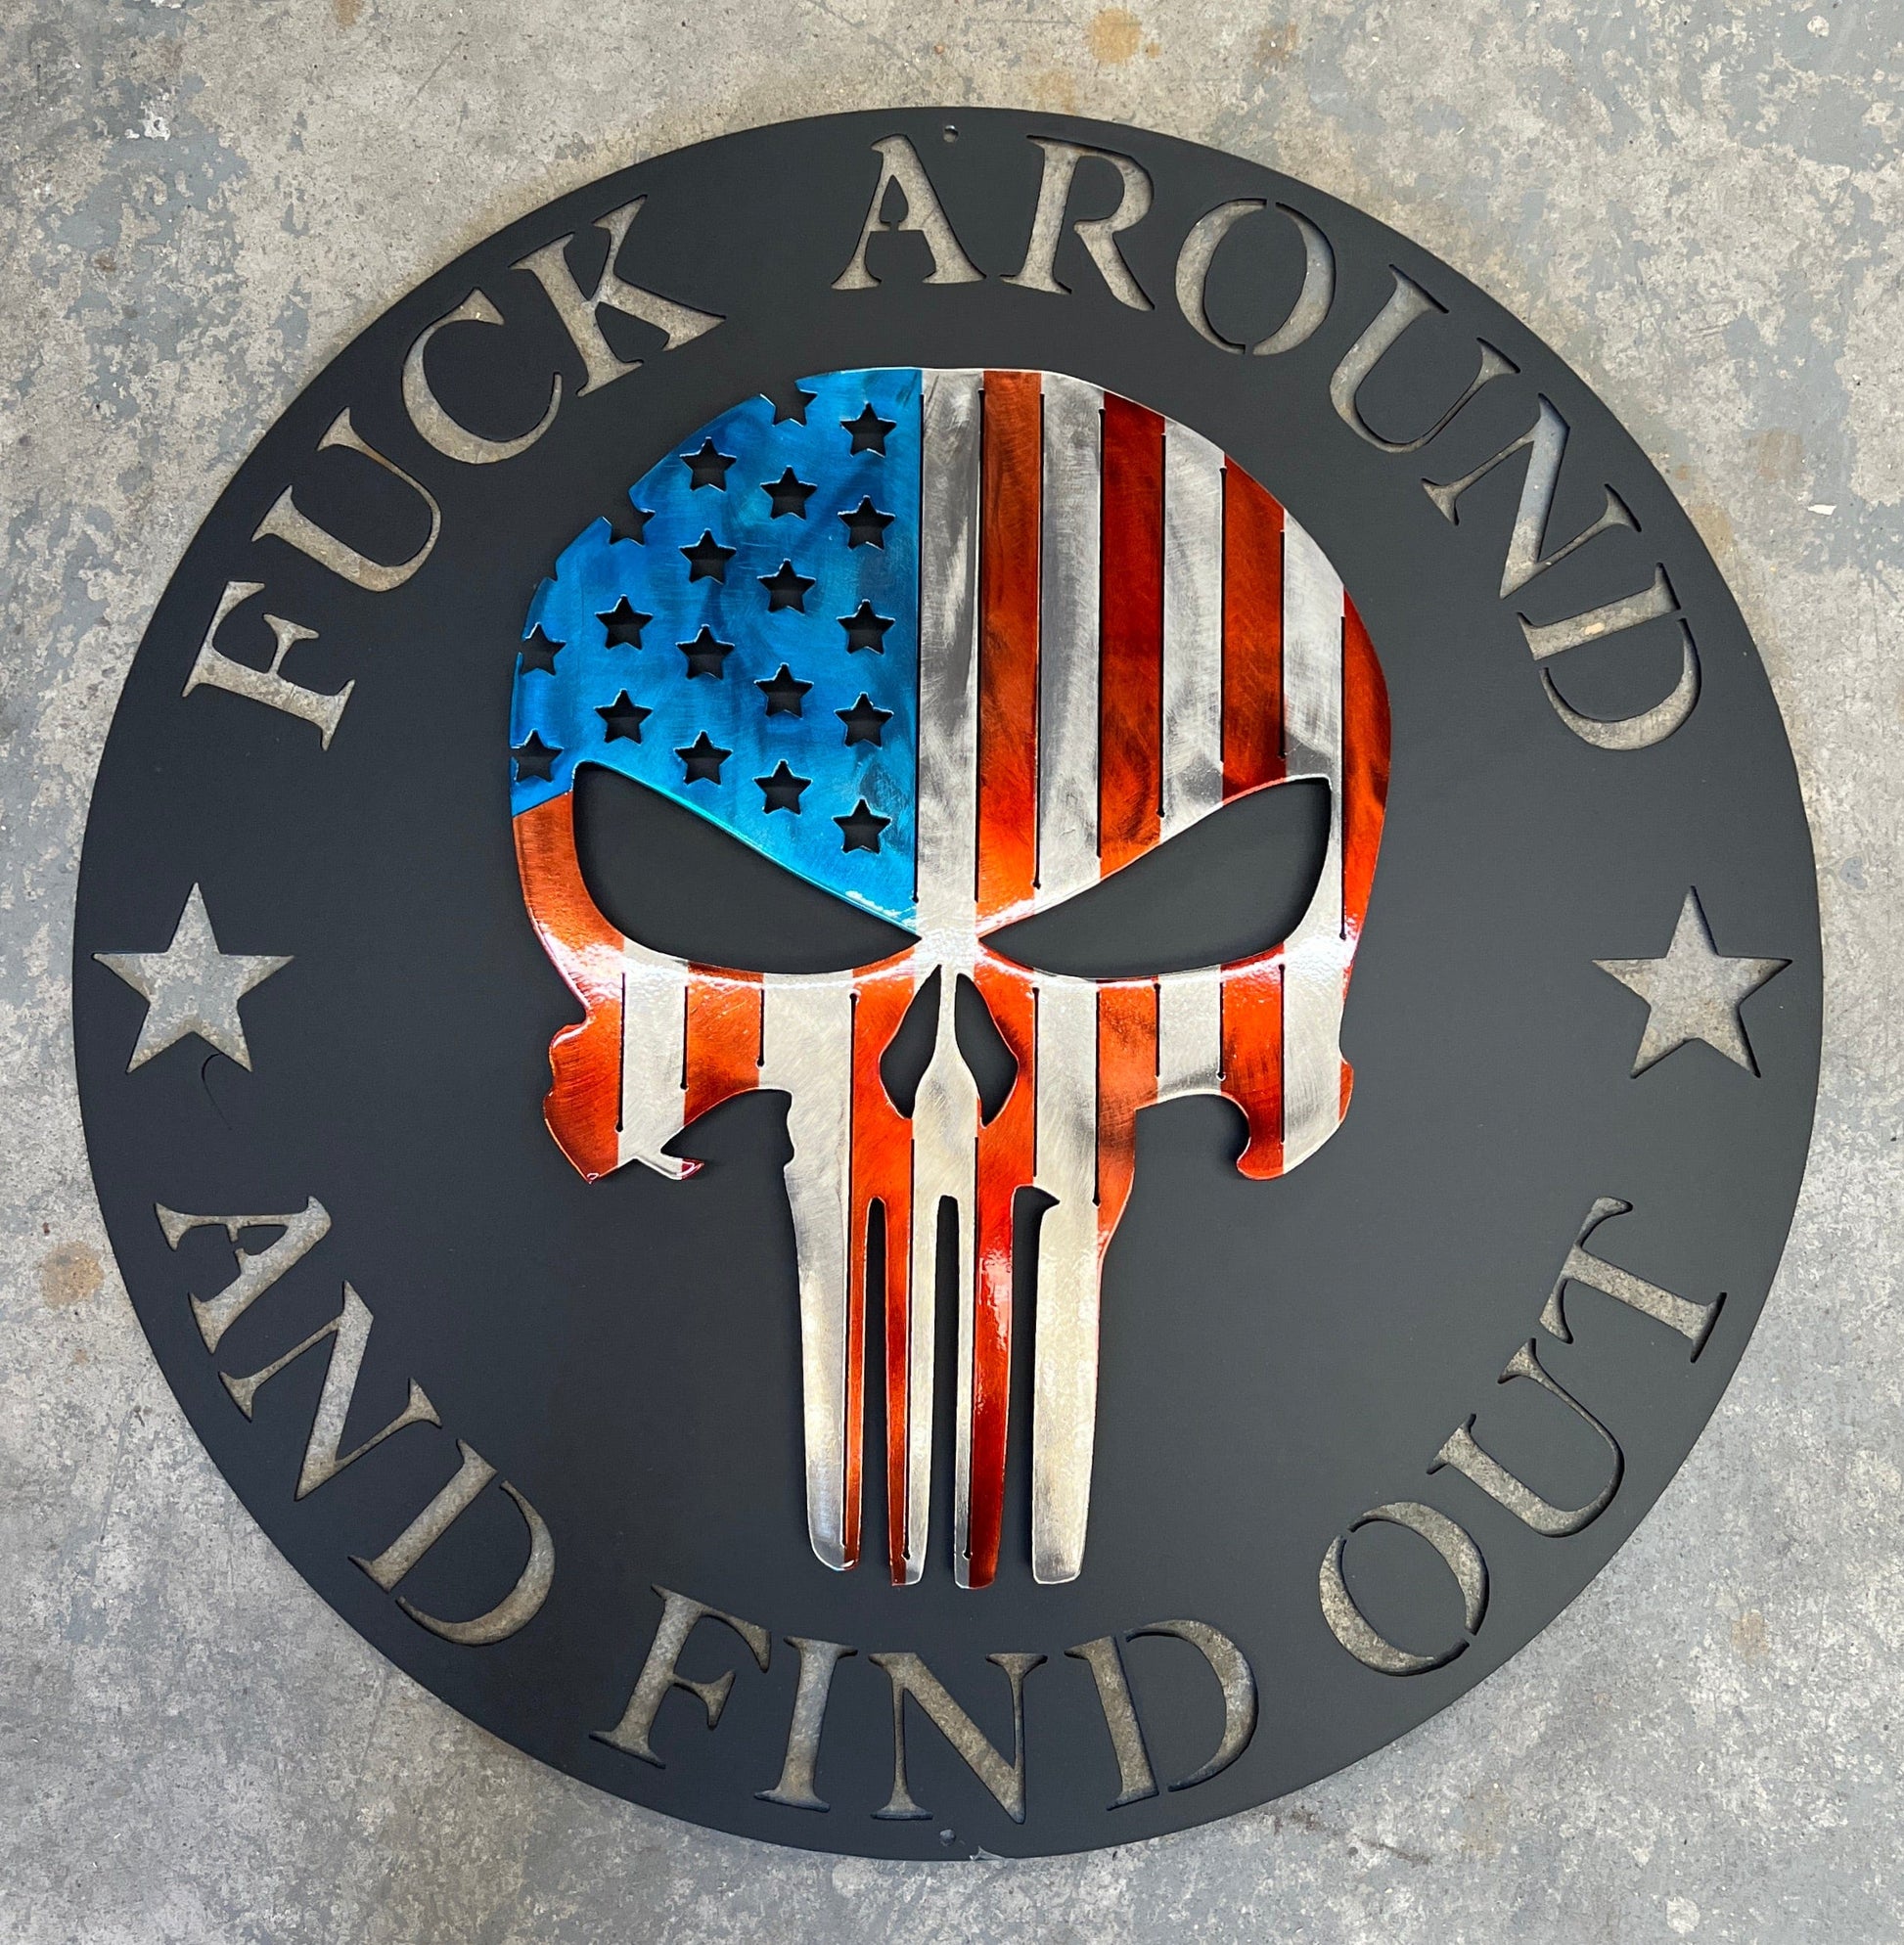 Rusty Rooster Fabrication & Design Physical product "F Around and Find Out" American Flag Punisher Skull Metal Sign (C85)